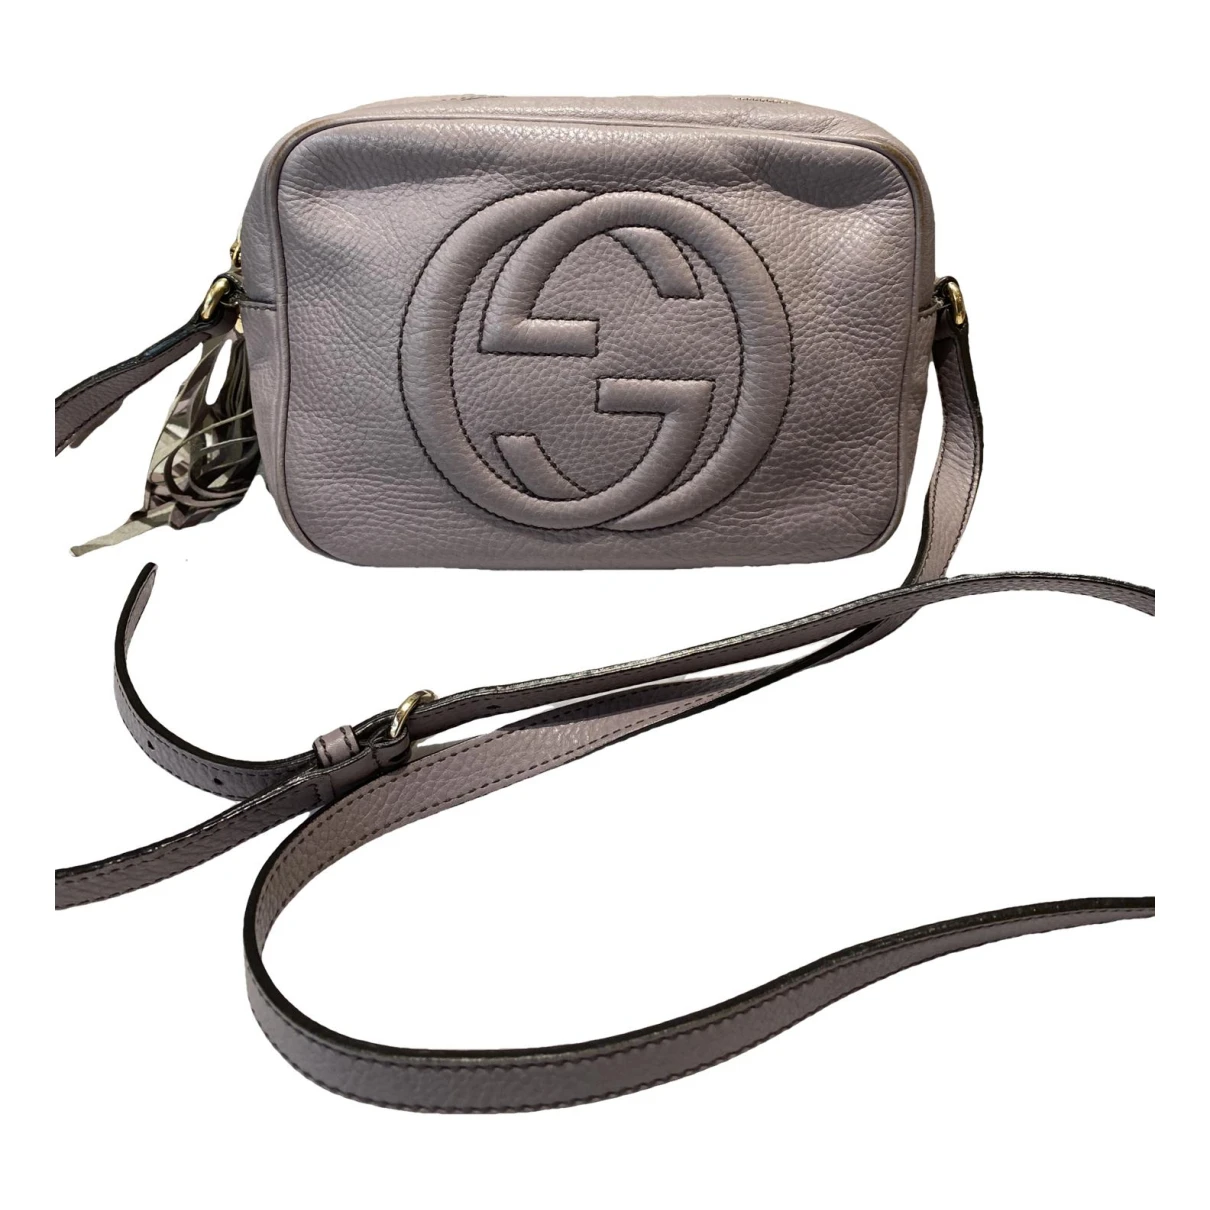 Pre-owned Gucci Soho Leather Crossbody Bag In Purple